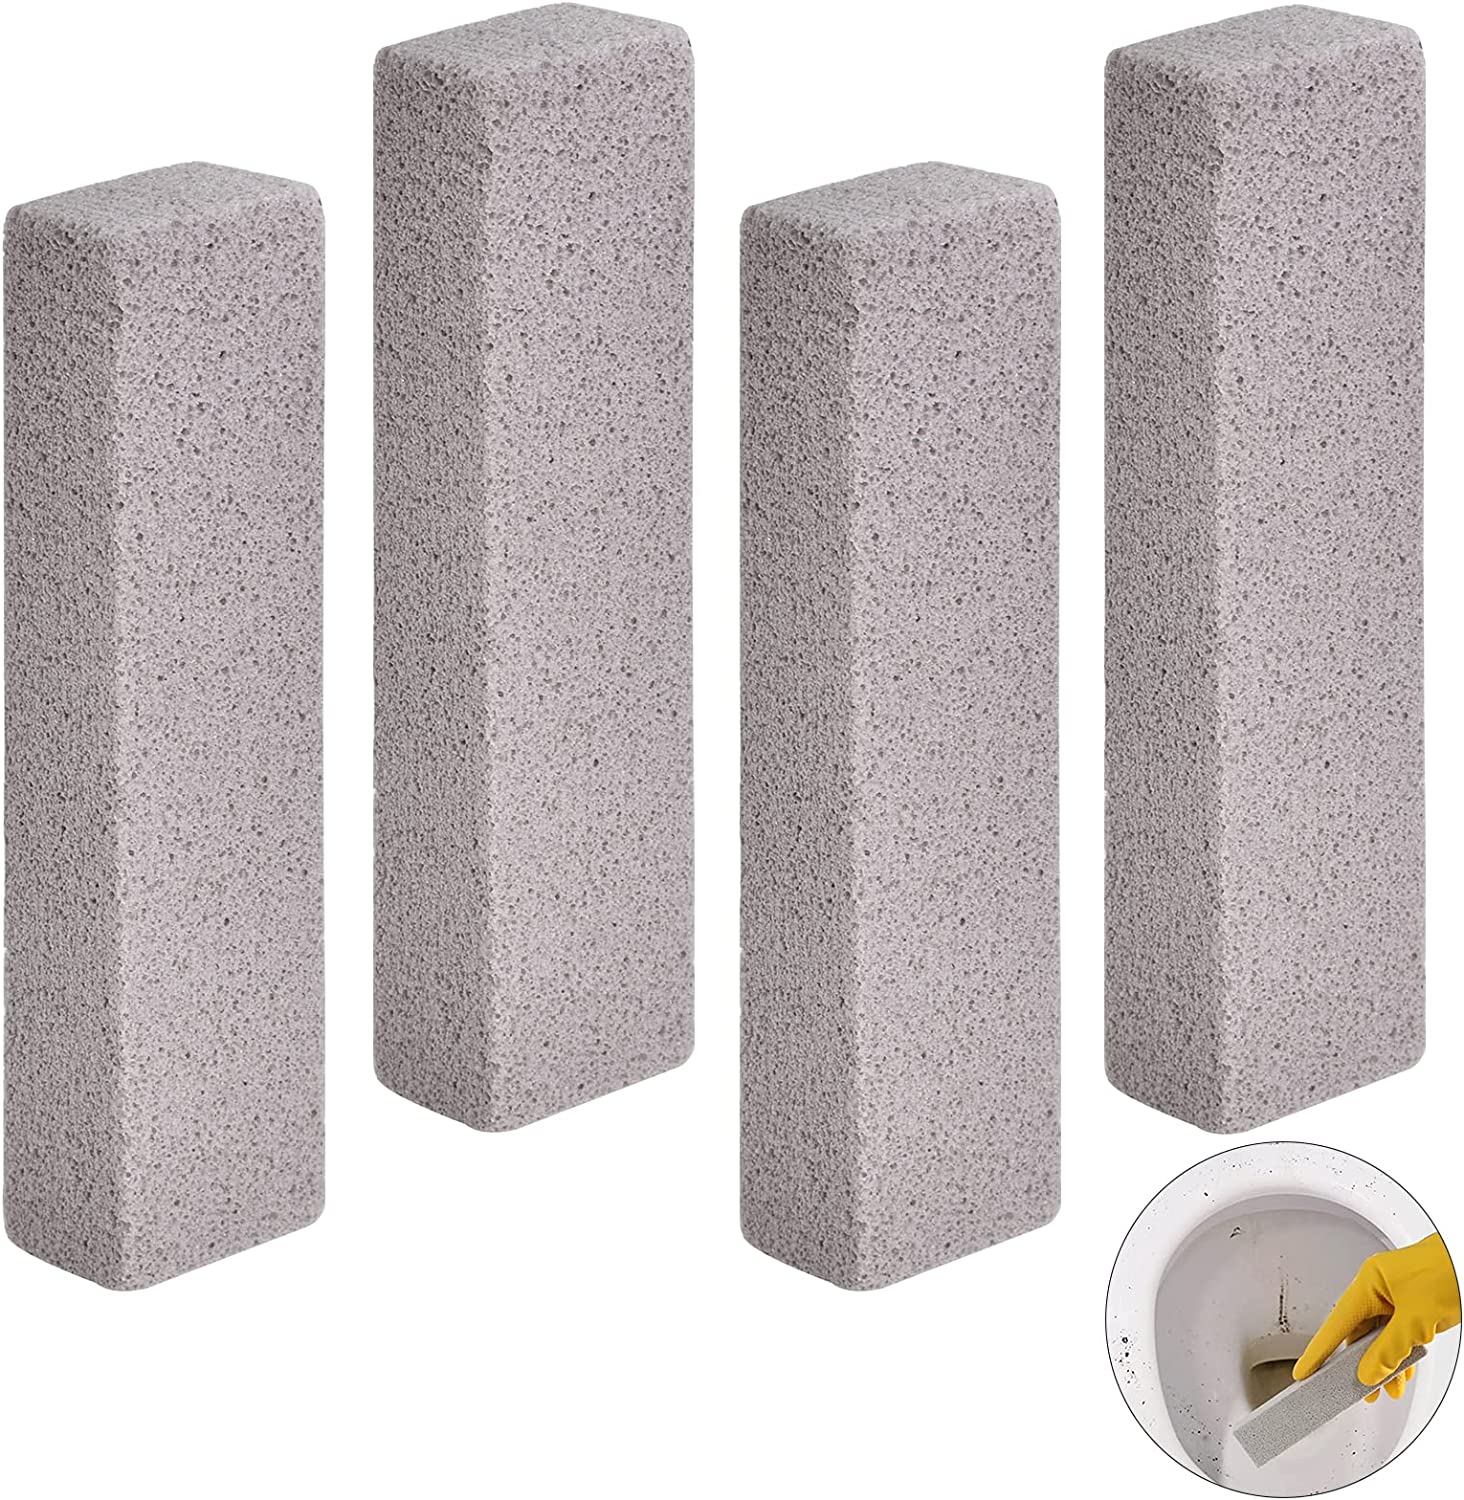 Blocks Pumice Stone for Toilet, Pack of 4 Pumice Stone Cleaning Brushes, Cleaning Block, Toilet Cleaning Blocks, Strong for Kitchen, Oven, Tile Cleaner, Grill, Kitchen, Shower, Bathroom, Sink